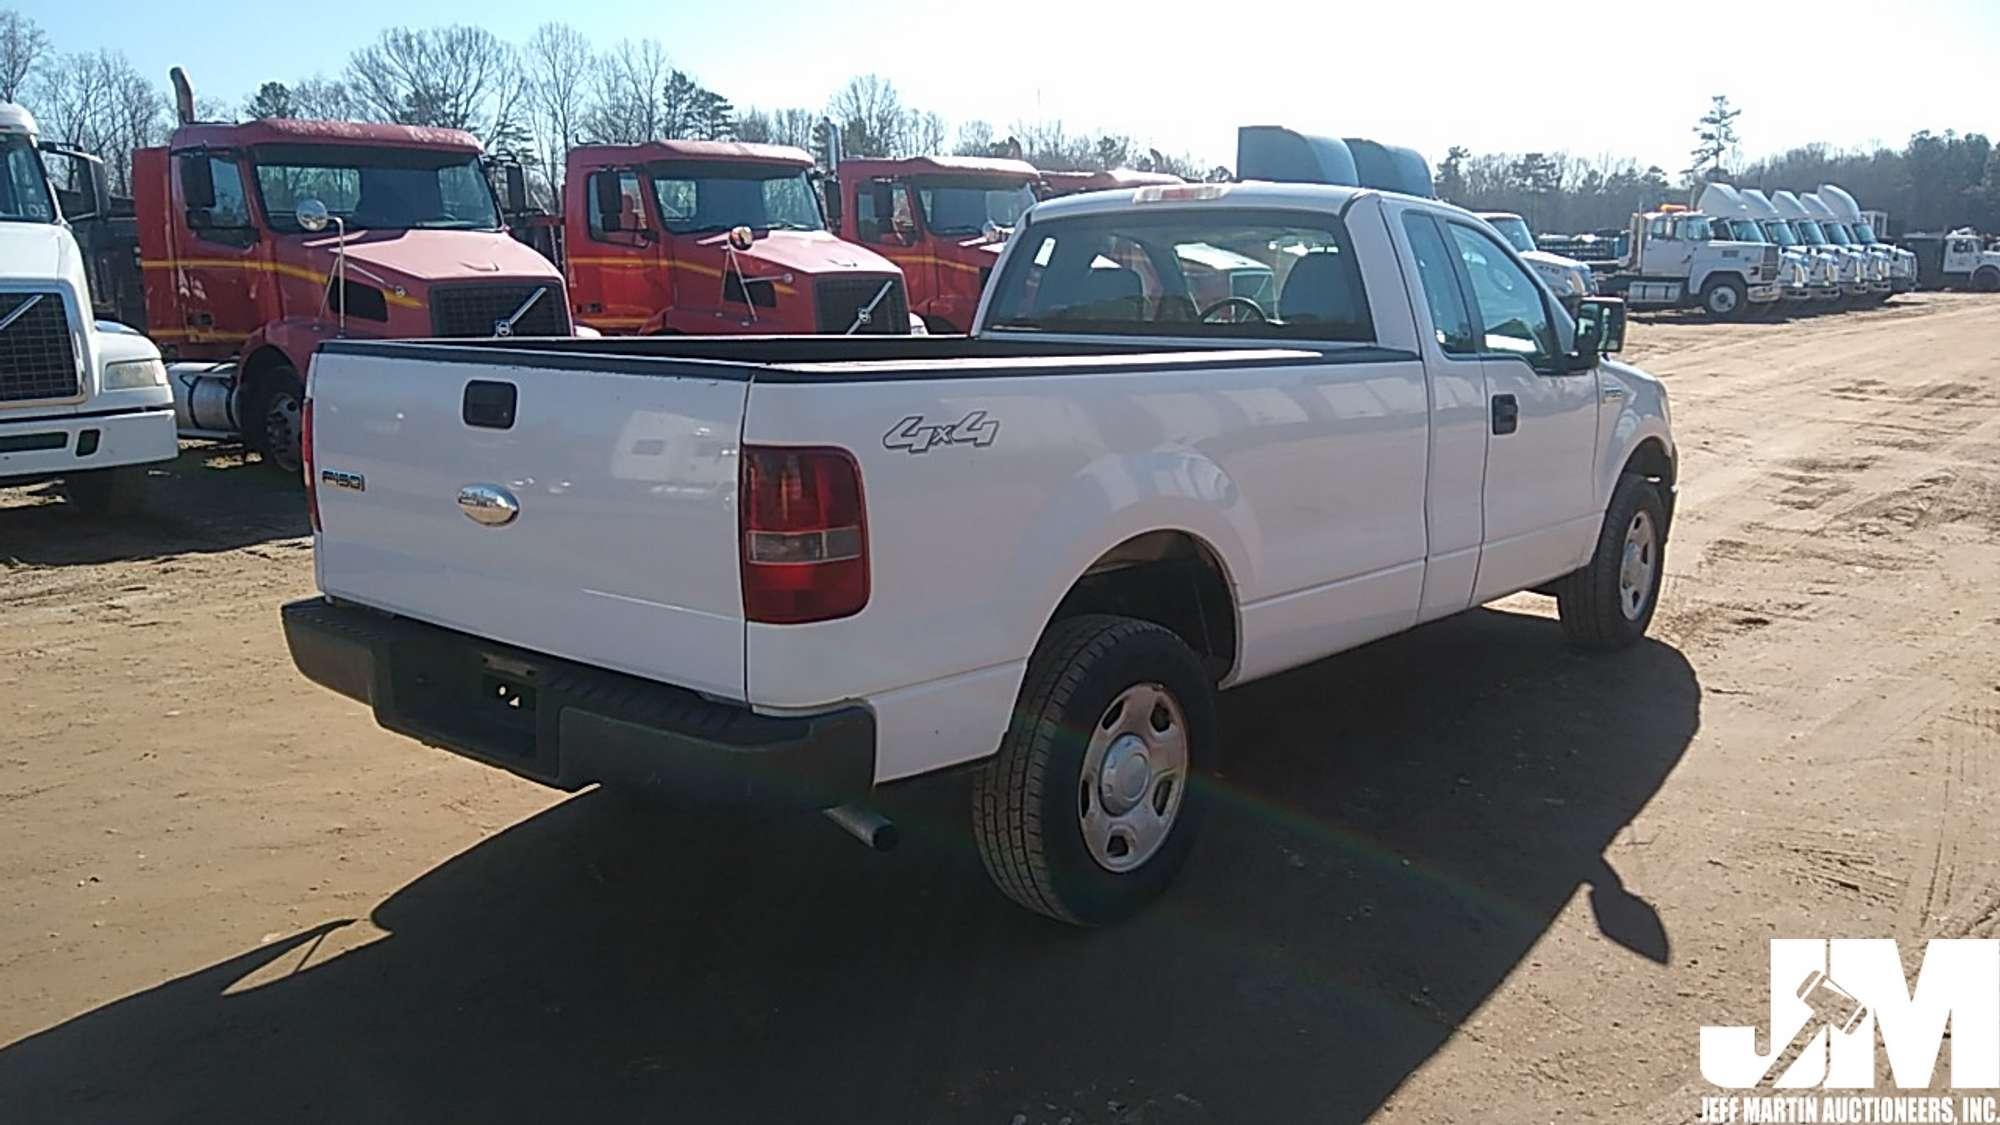 2006 FORD F-150 EXTENDED CAB 4X4 PICKUP VIN: 1FTRF14W76NB77554